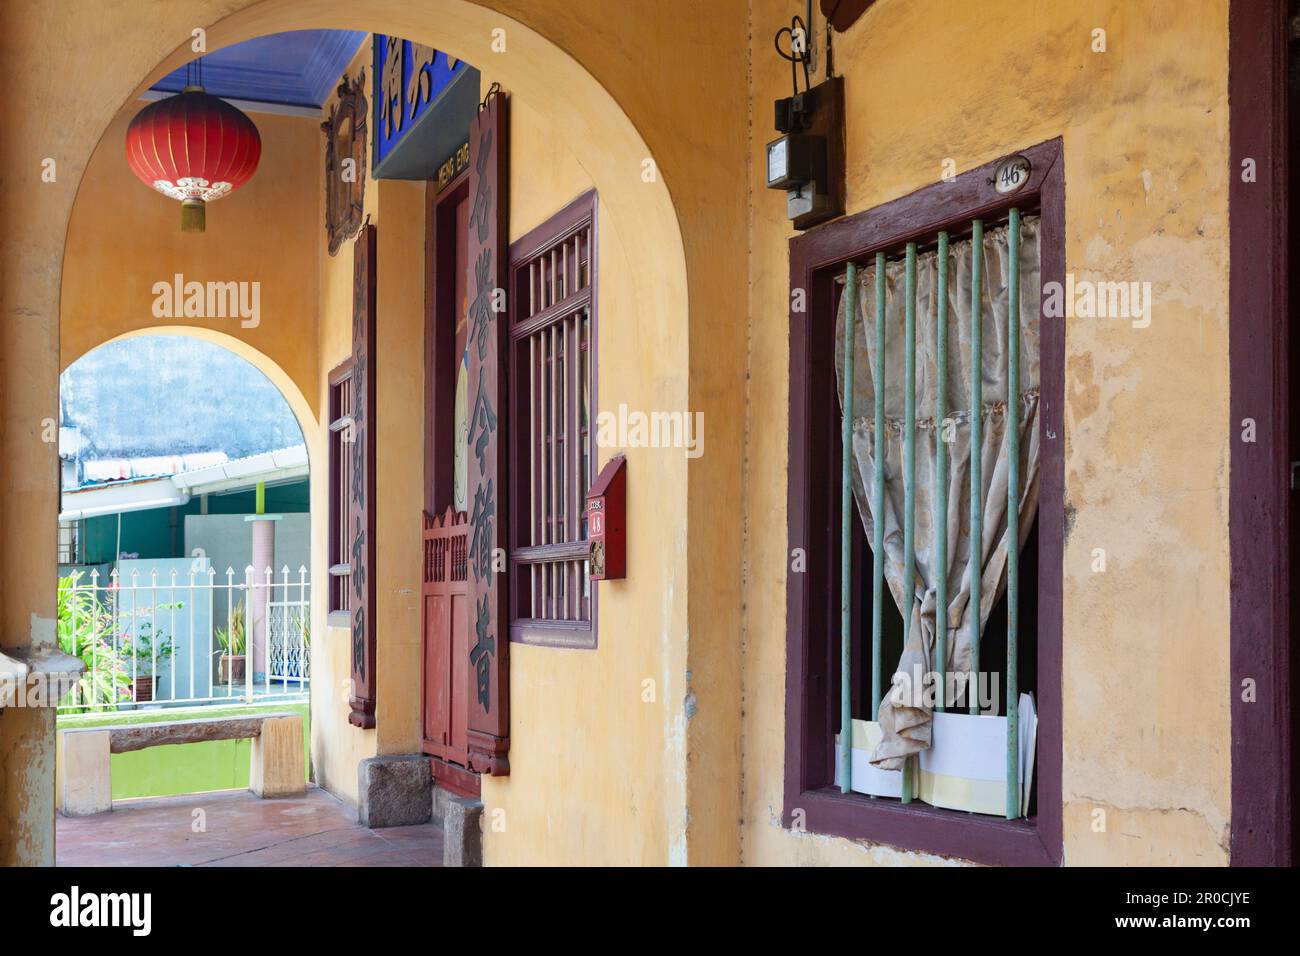 Georgetown, Penang, Malaysia - September 01, 2014: Chinese house at Lebuh Armenia, one of the main streets in historical Georgetown, Penang, Malaysia Stock Photo